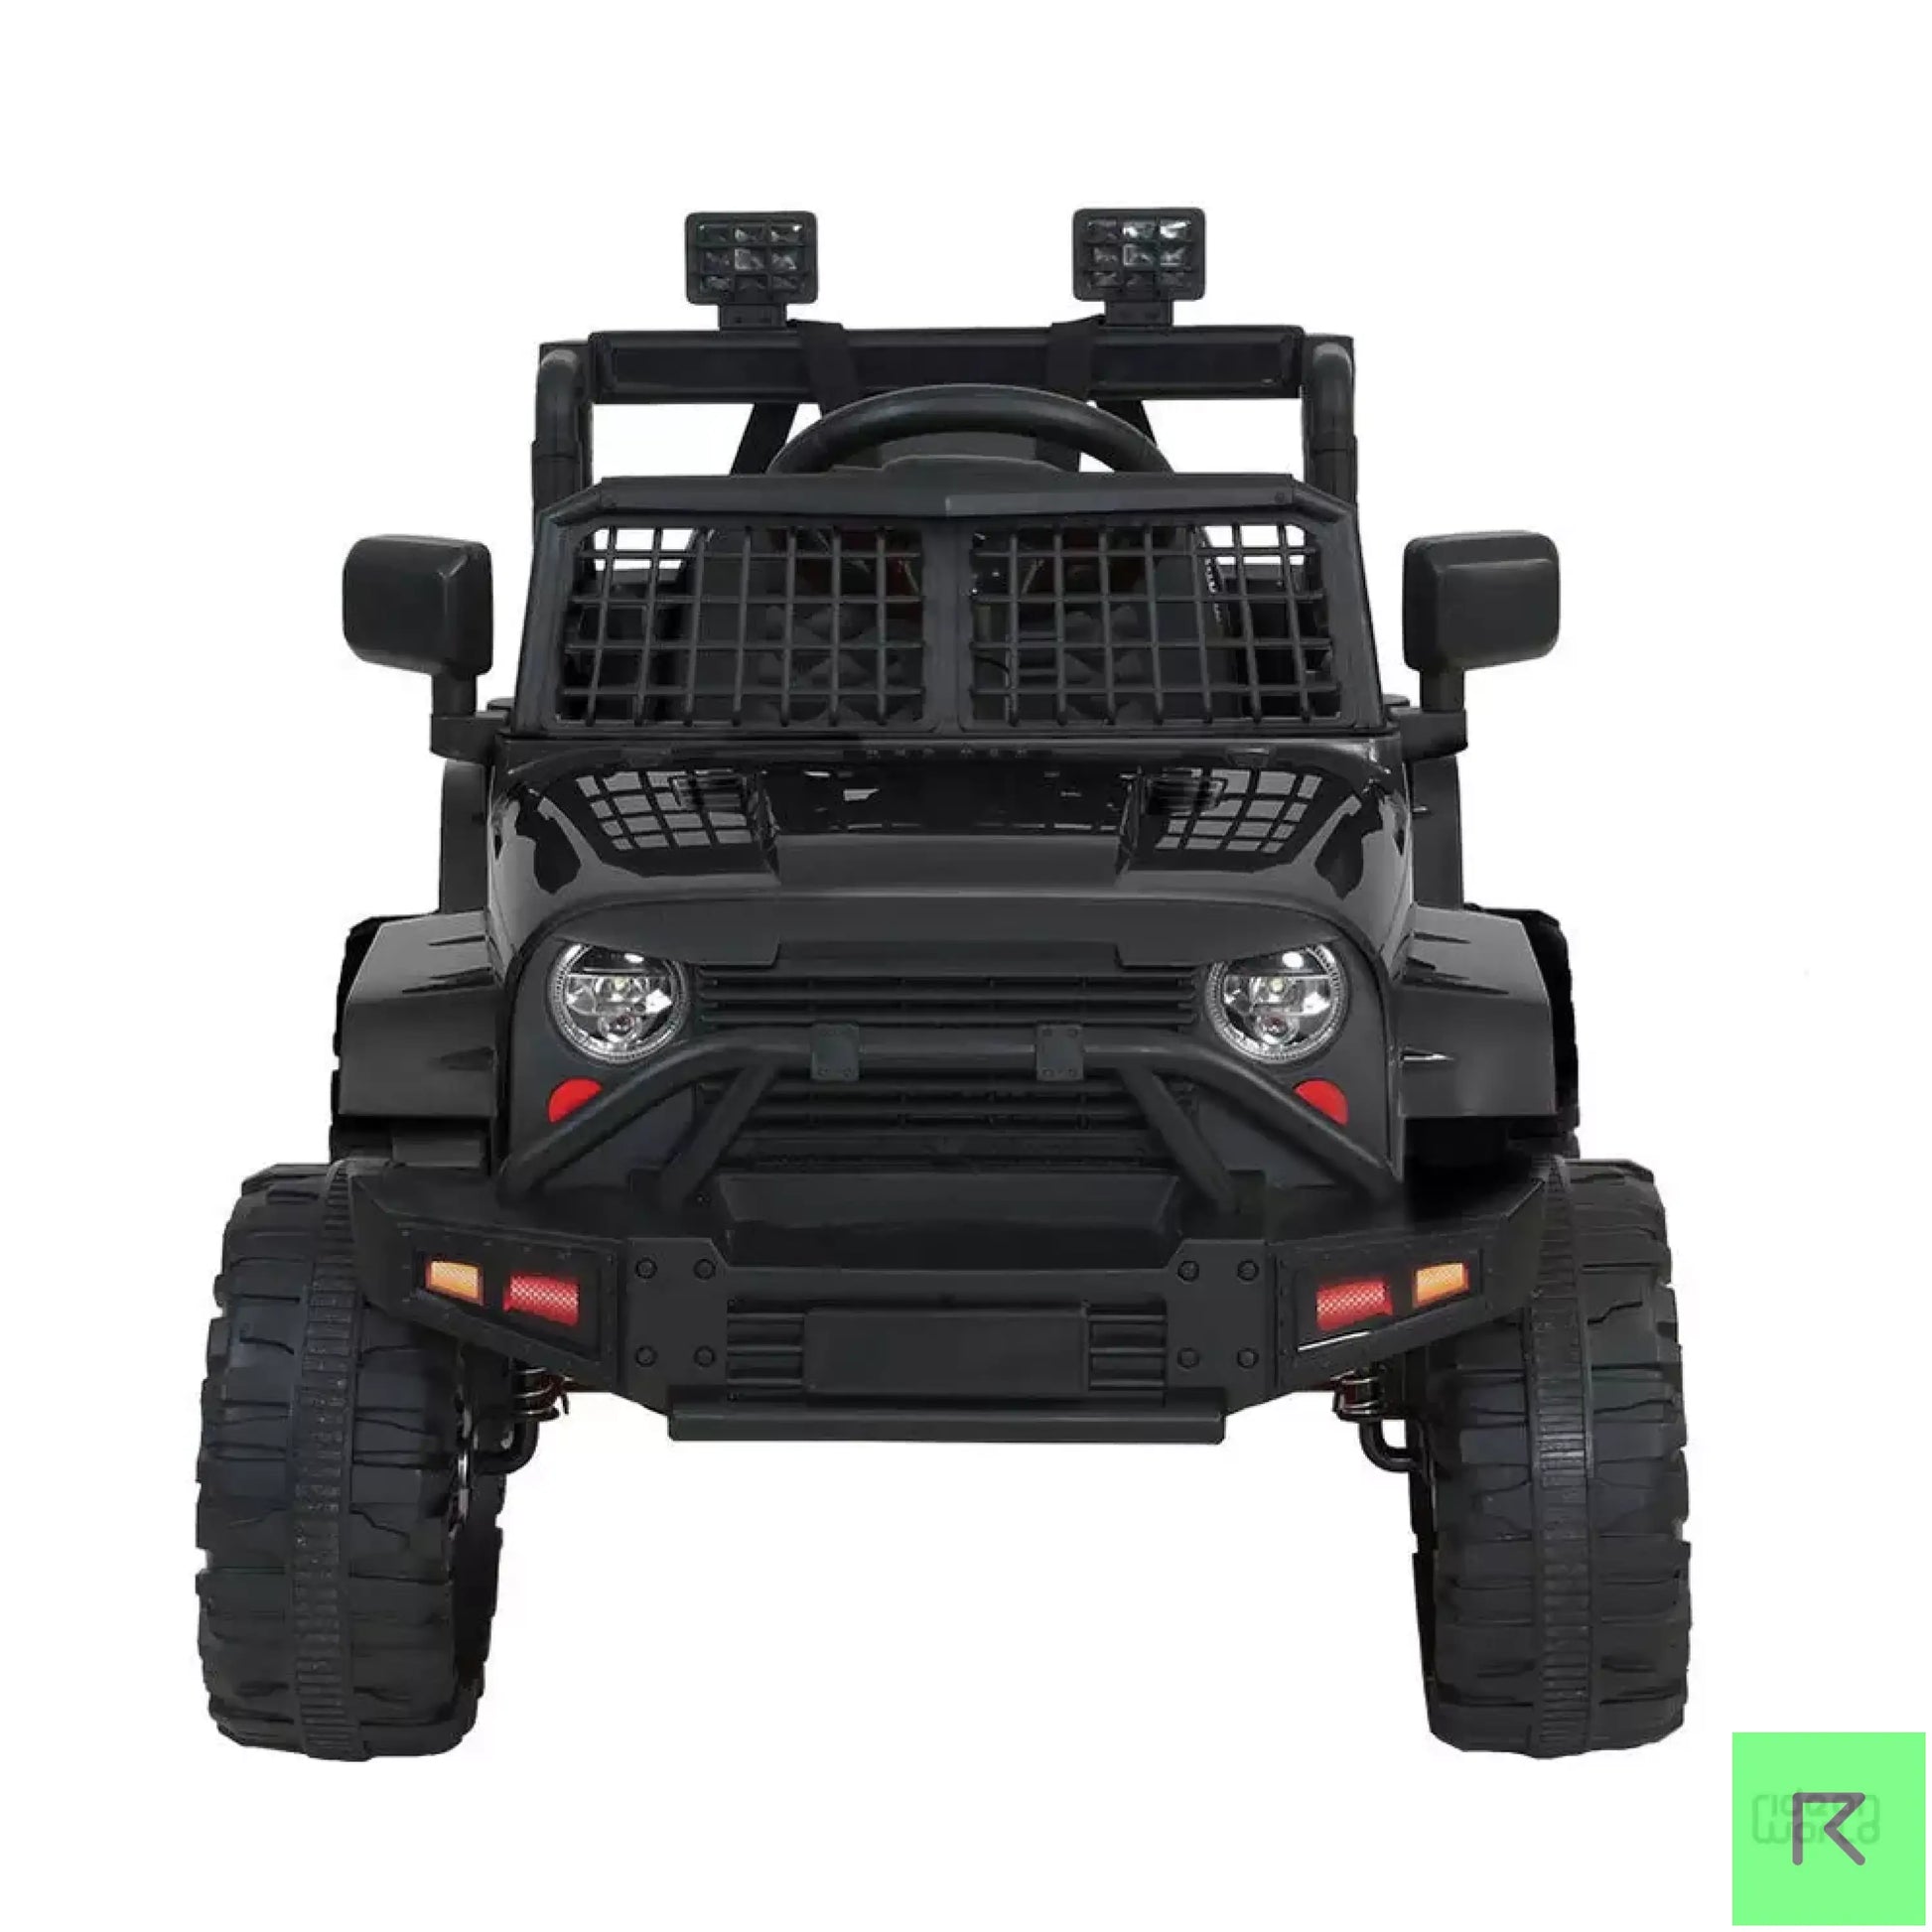 ROW KIDS Kids Ride On Car Electric 12V Car Toys Jeep Battery Remote Control Black